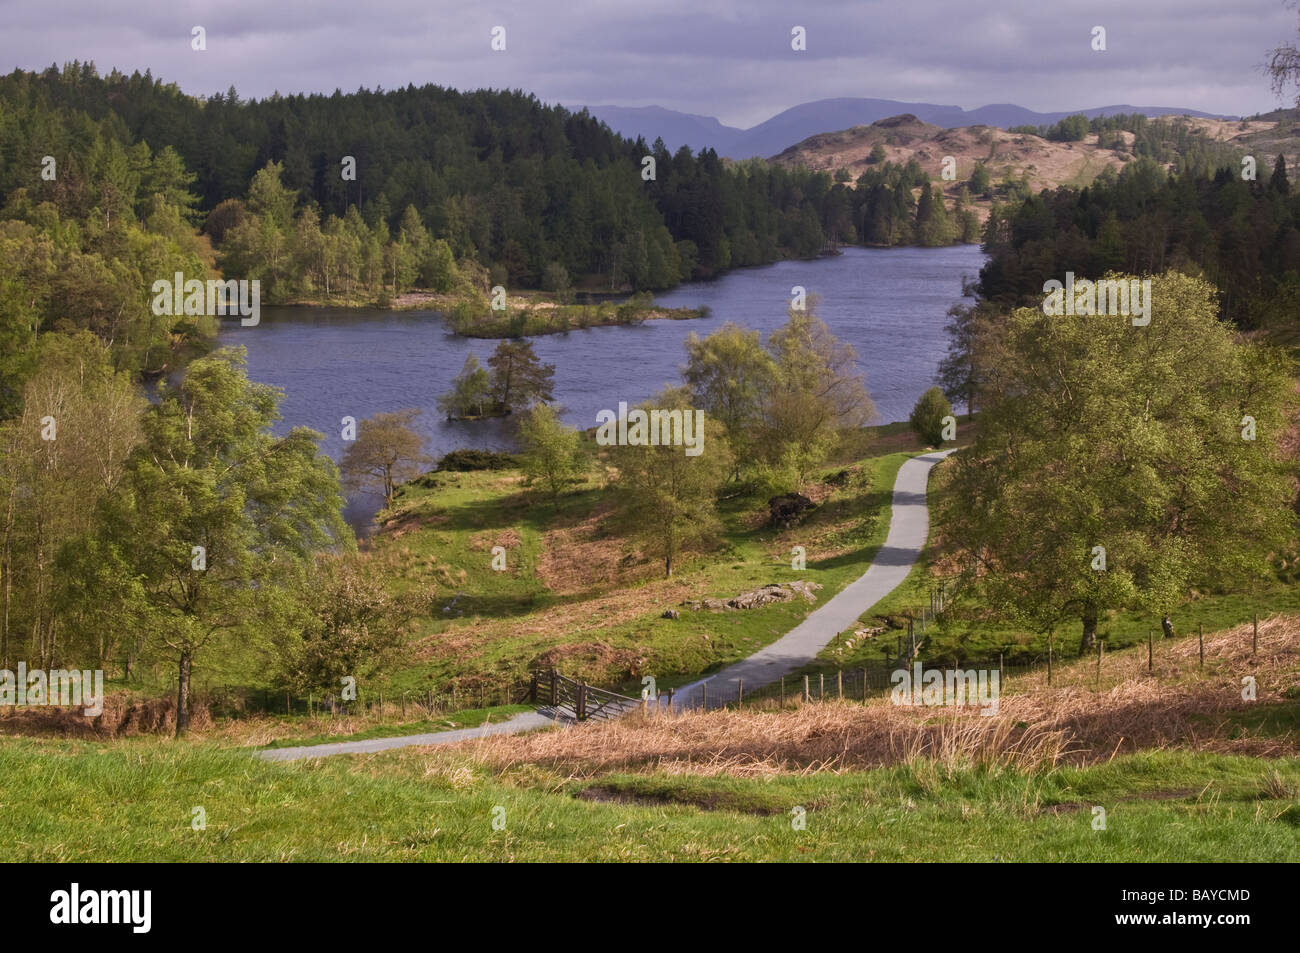 Tarn Hows Lake District showing the trees, mountains and general setting Stock Photo